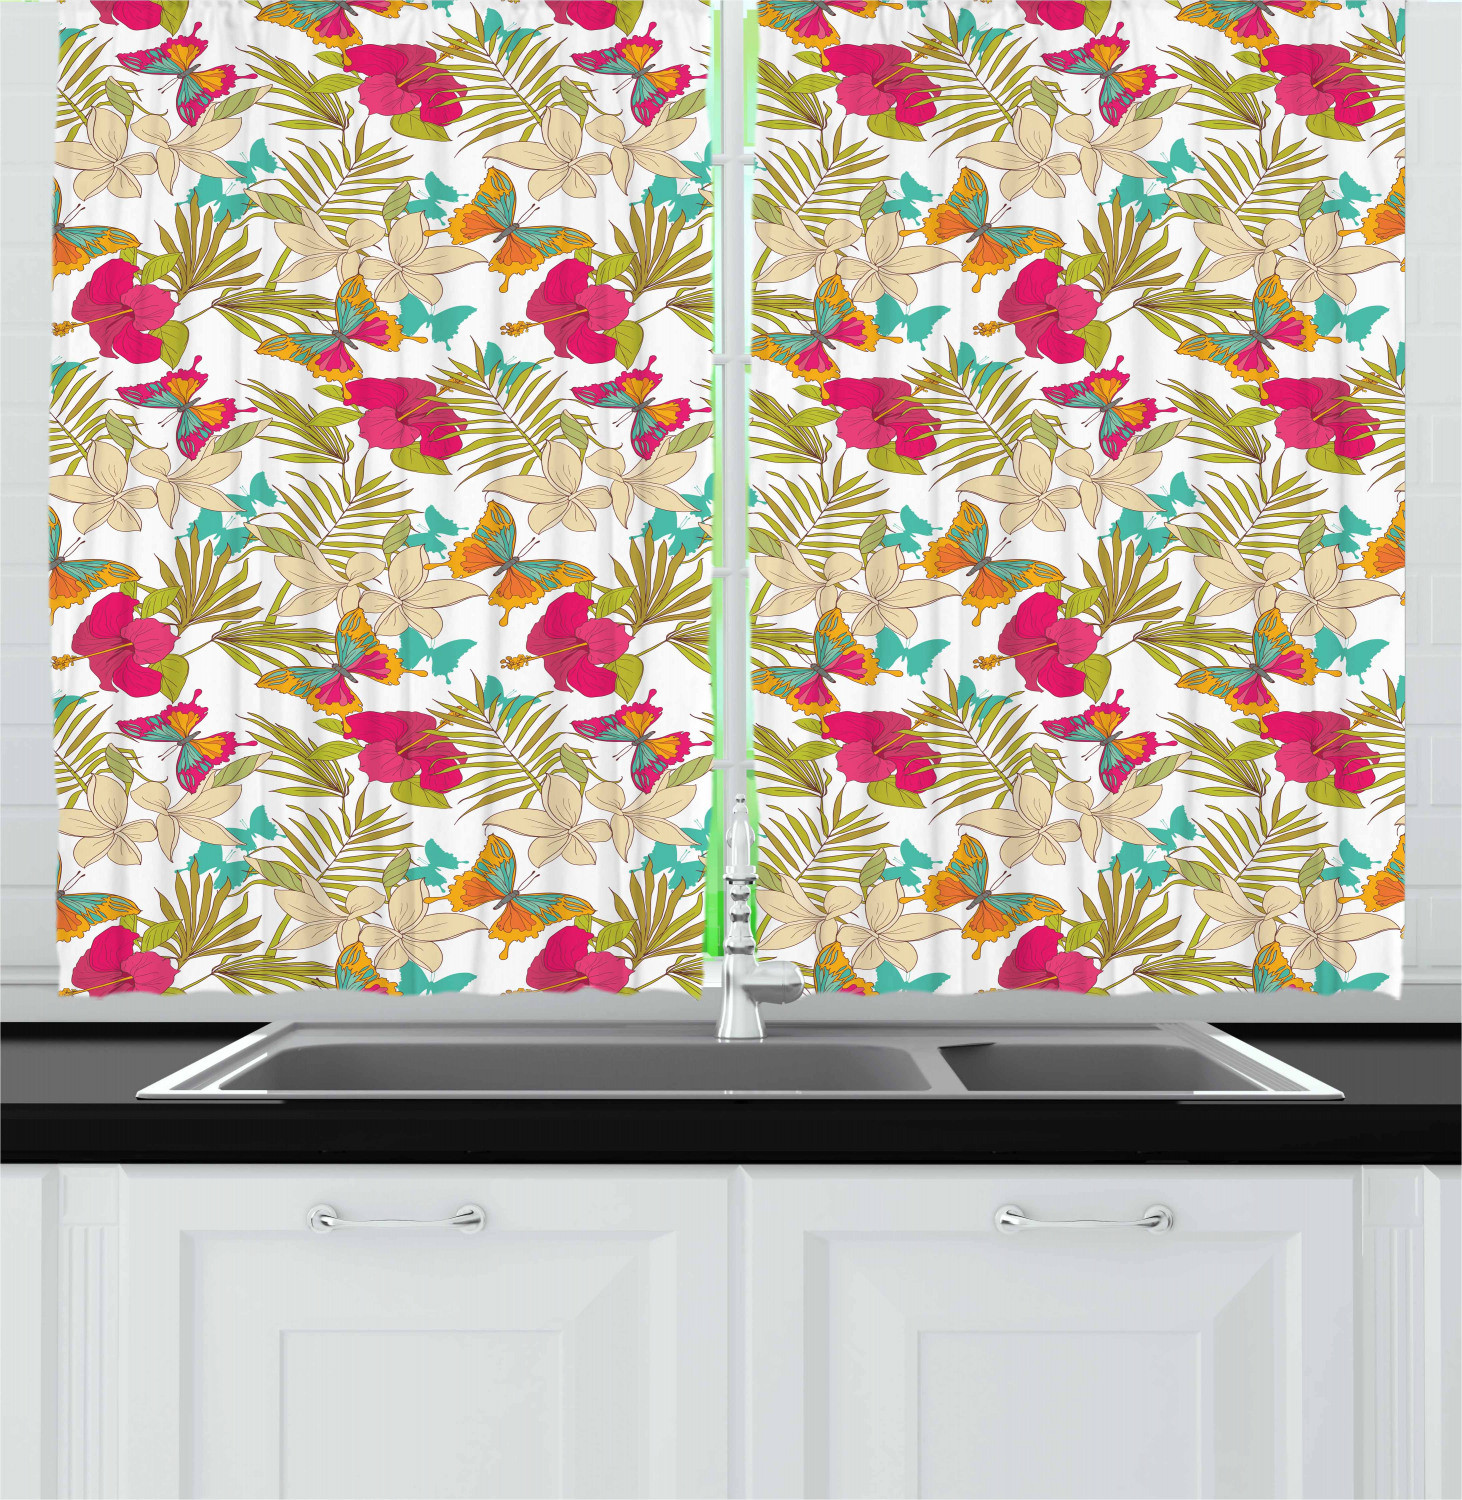 Fabric For Kitchen Curtain
 Vintage Fabric Kitchen Curtains 2 Panel Set Window Drapes